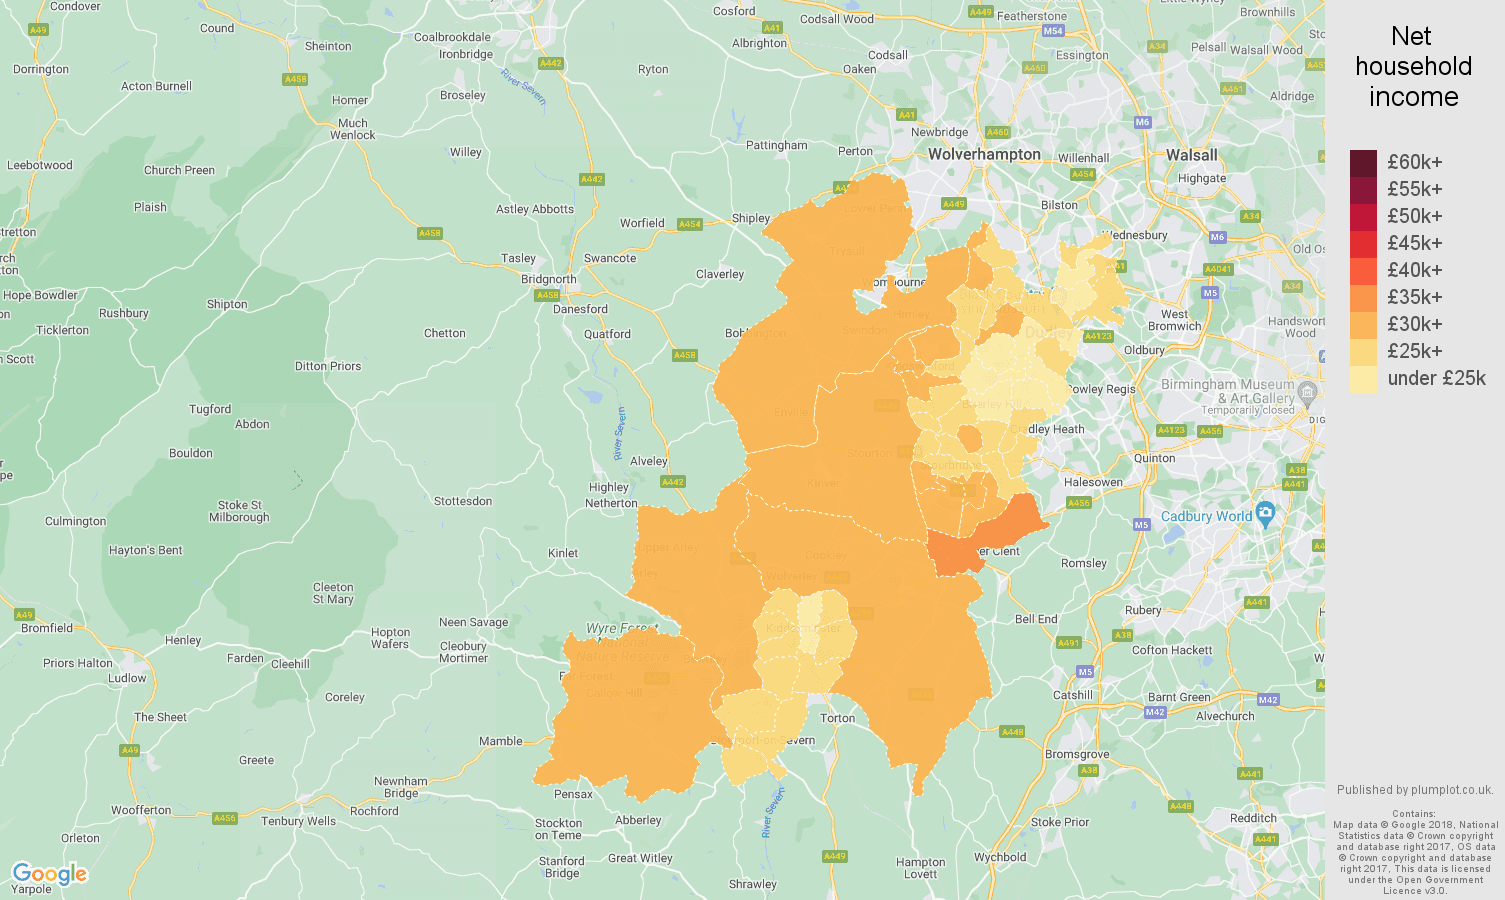 Dudley net household income map